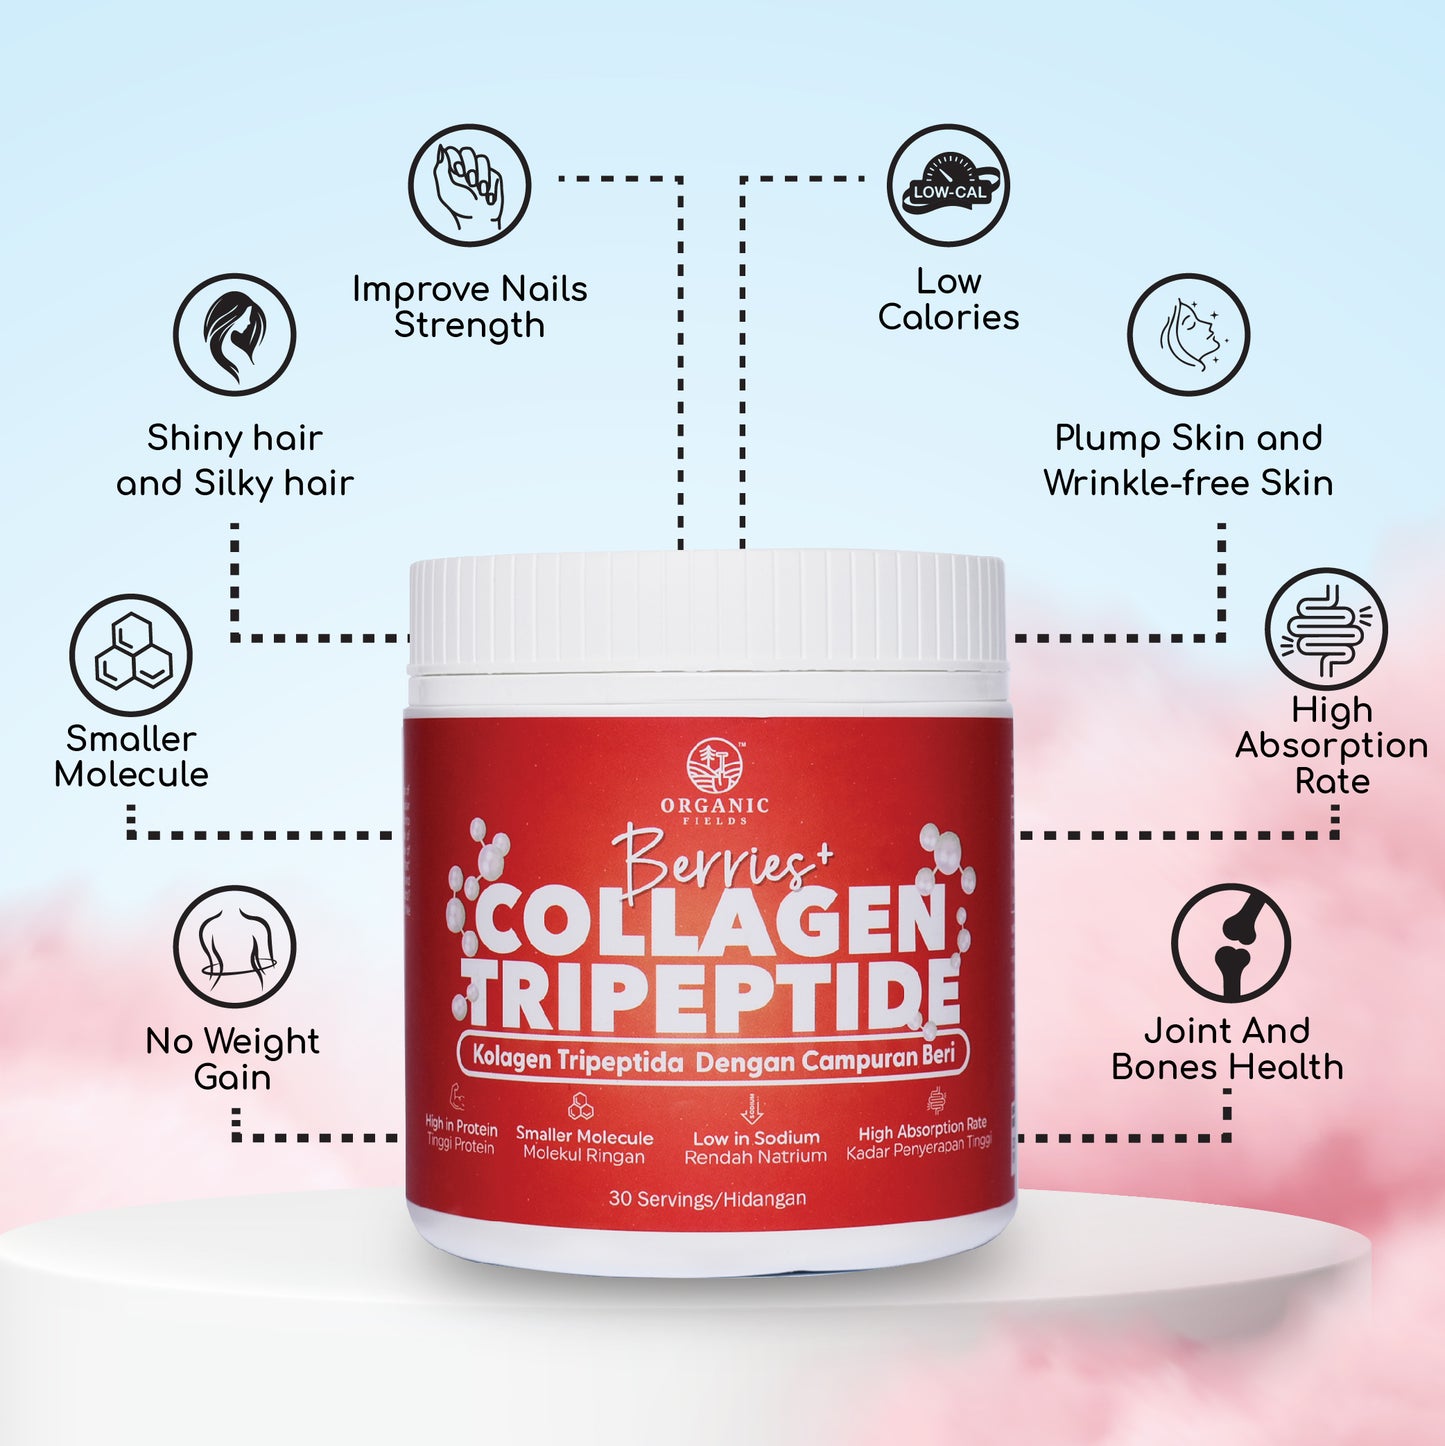 Superfood Collagen Tripeptide 180gm